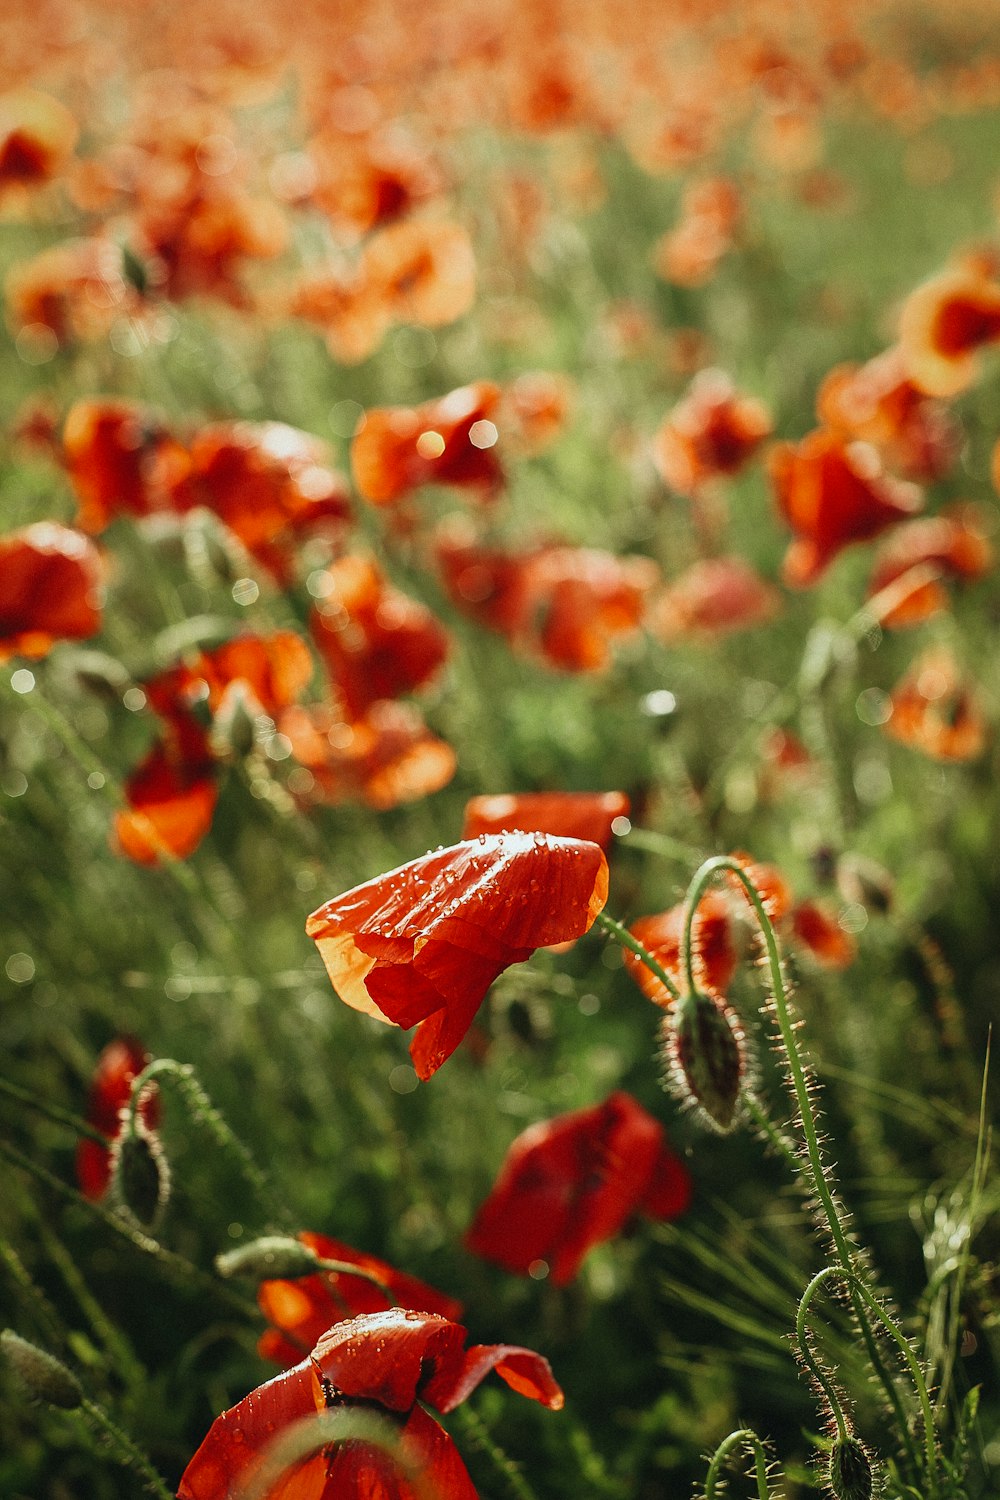 a field full of red flowers with water droplets on them